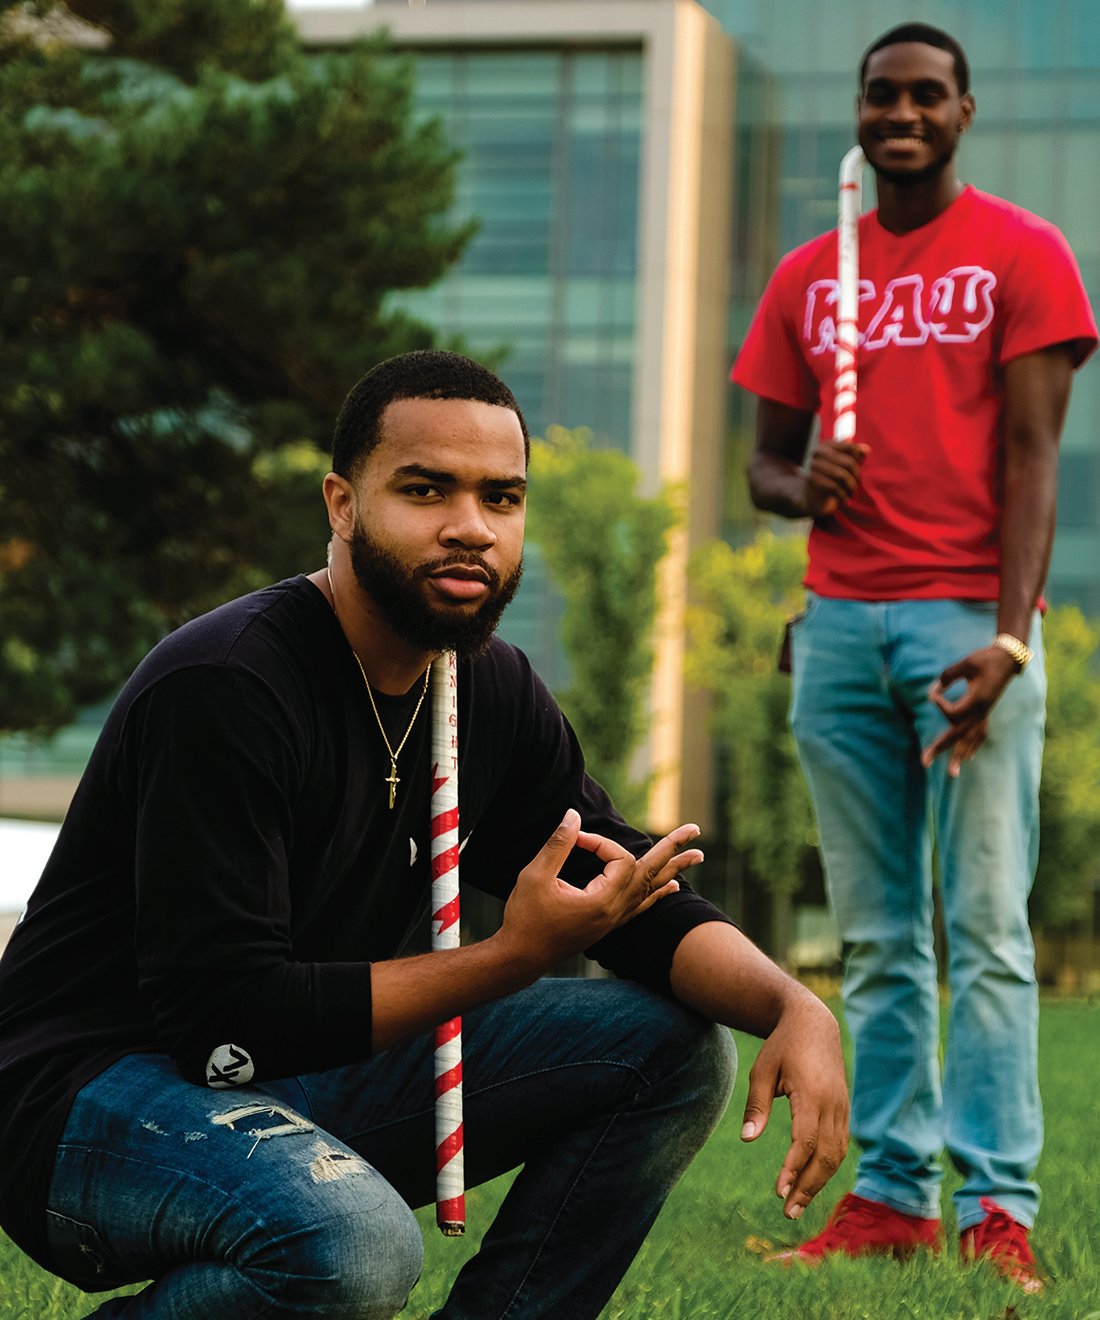 Two members of Kappa Alpha Psi fraternity on campus while showing fraternity letters with their hands